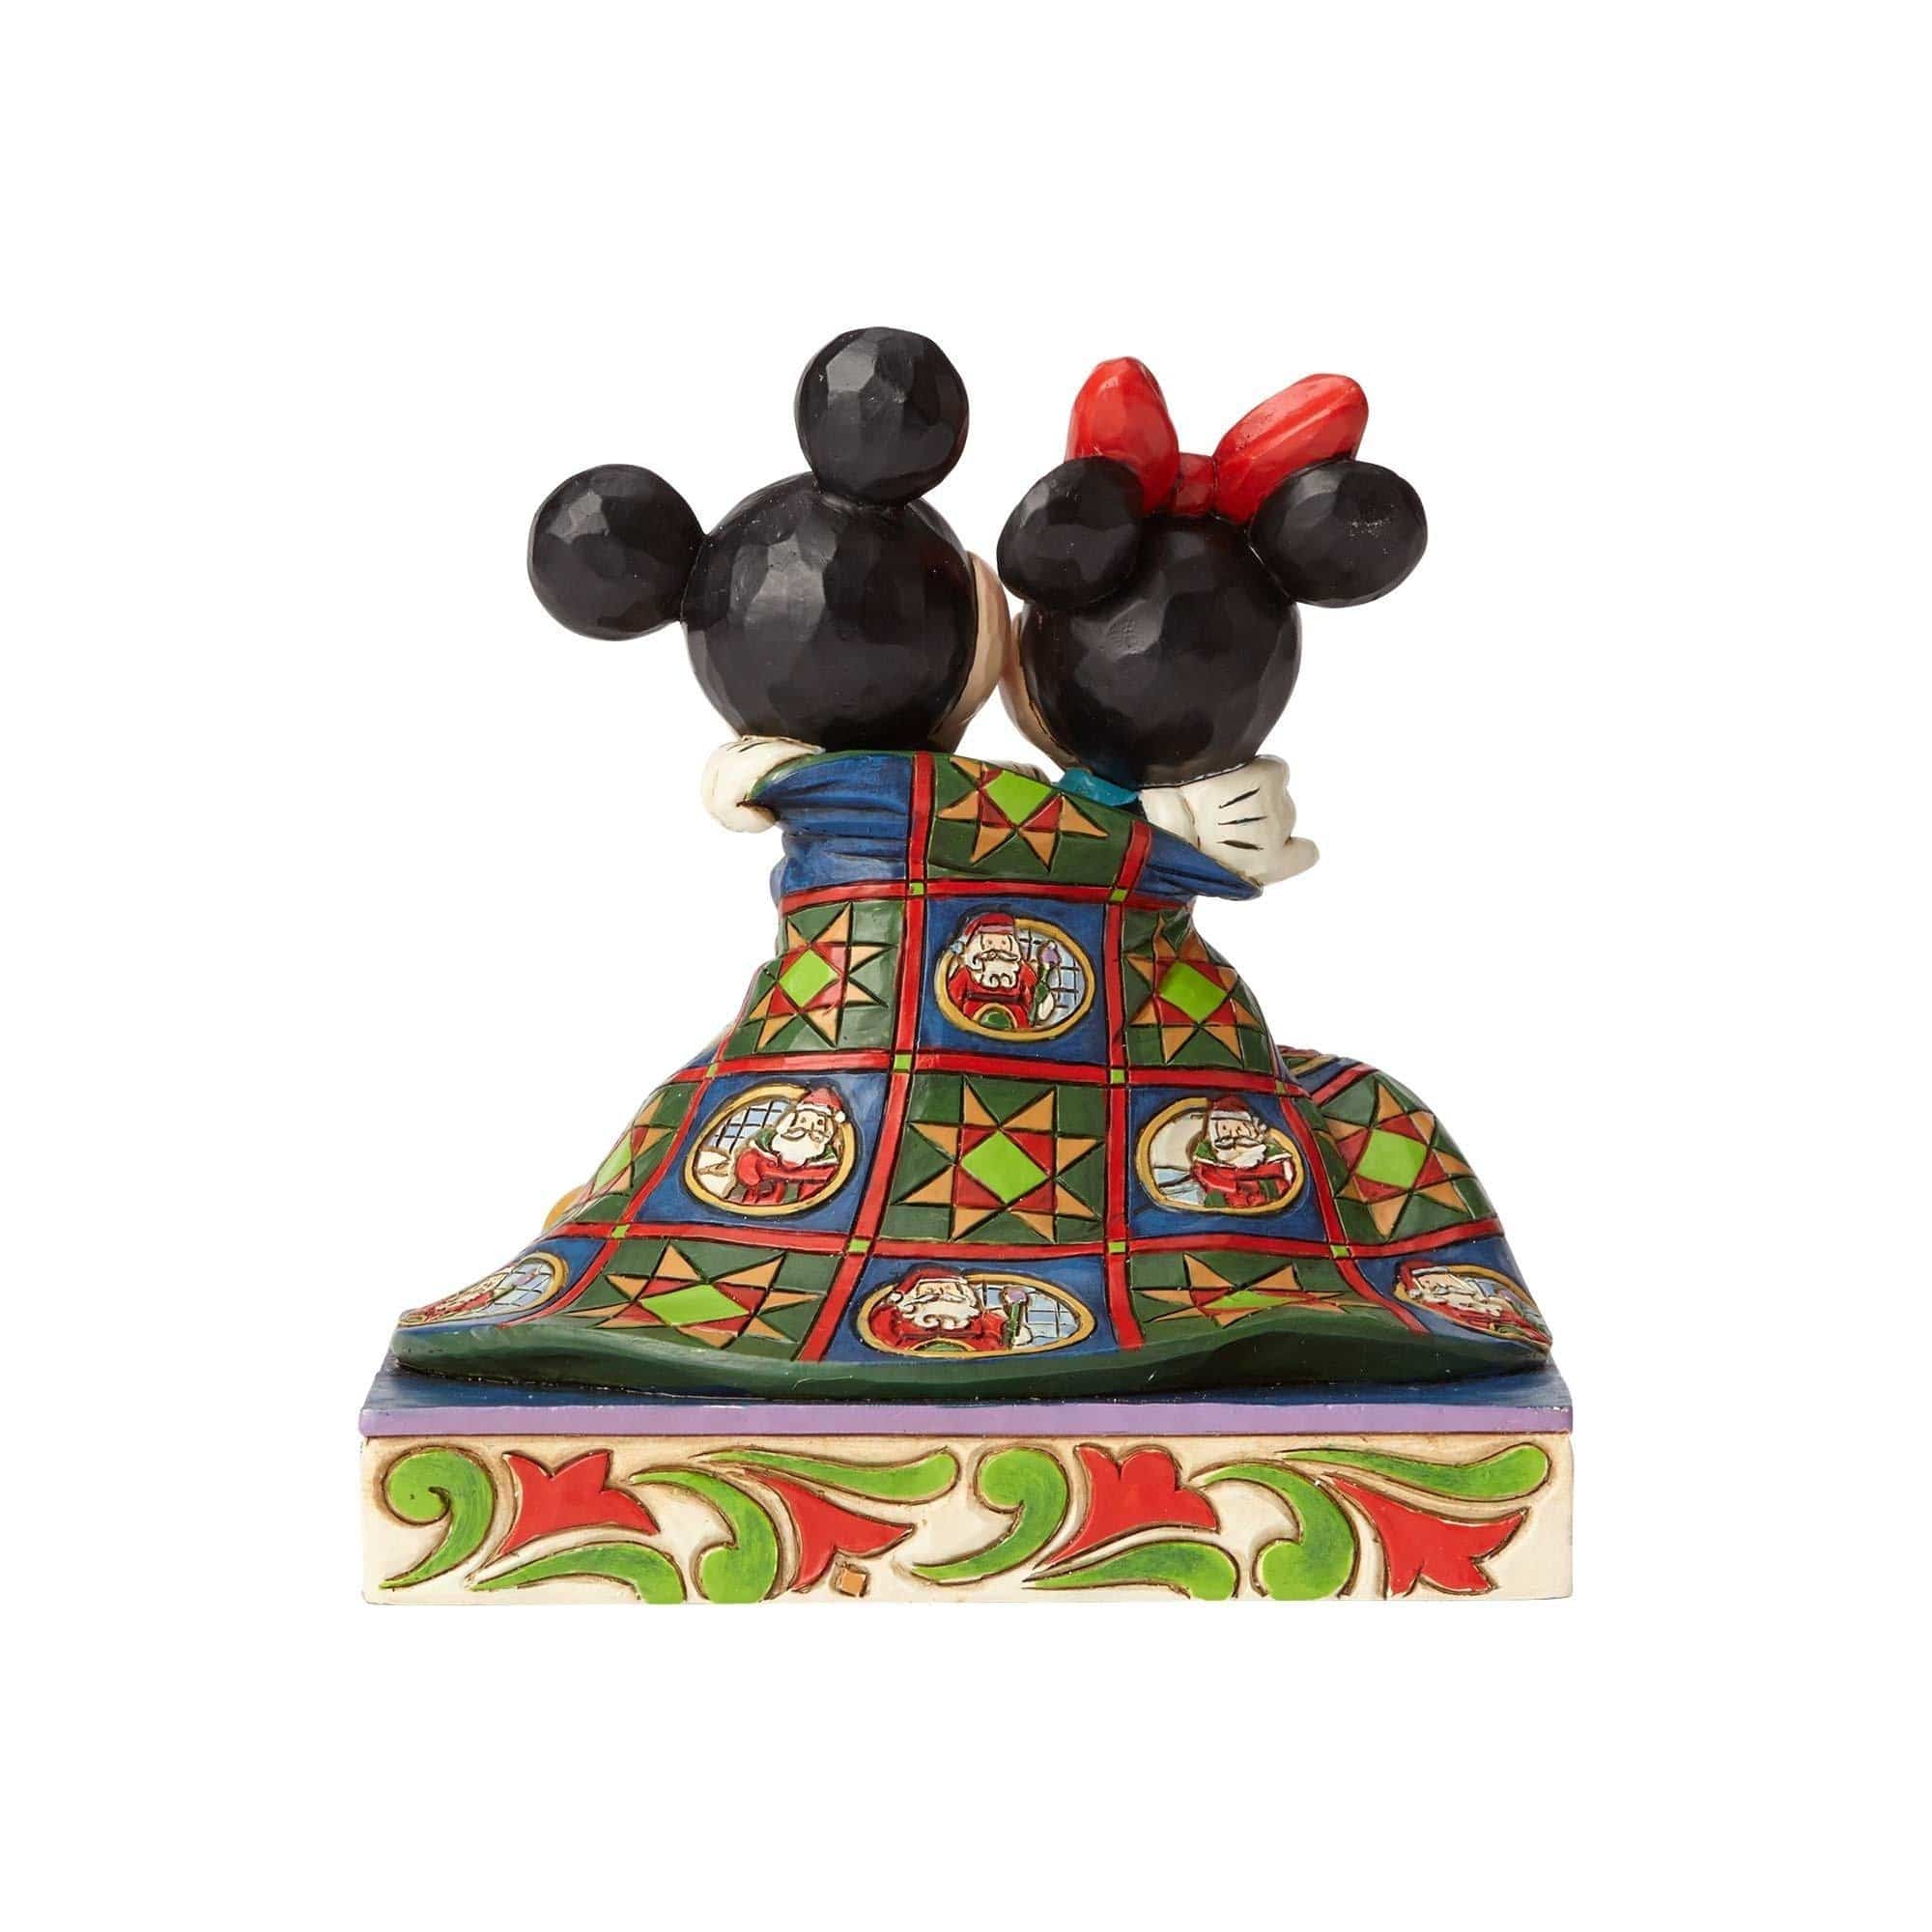 Enesco Disney Ornament Disney Traditions Figurine - Warm Wishes - Mickey and Minnie Mouse in Blanket